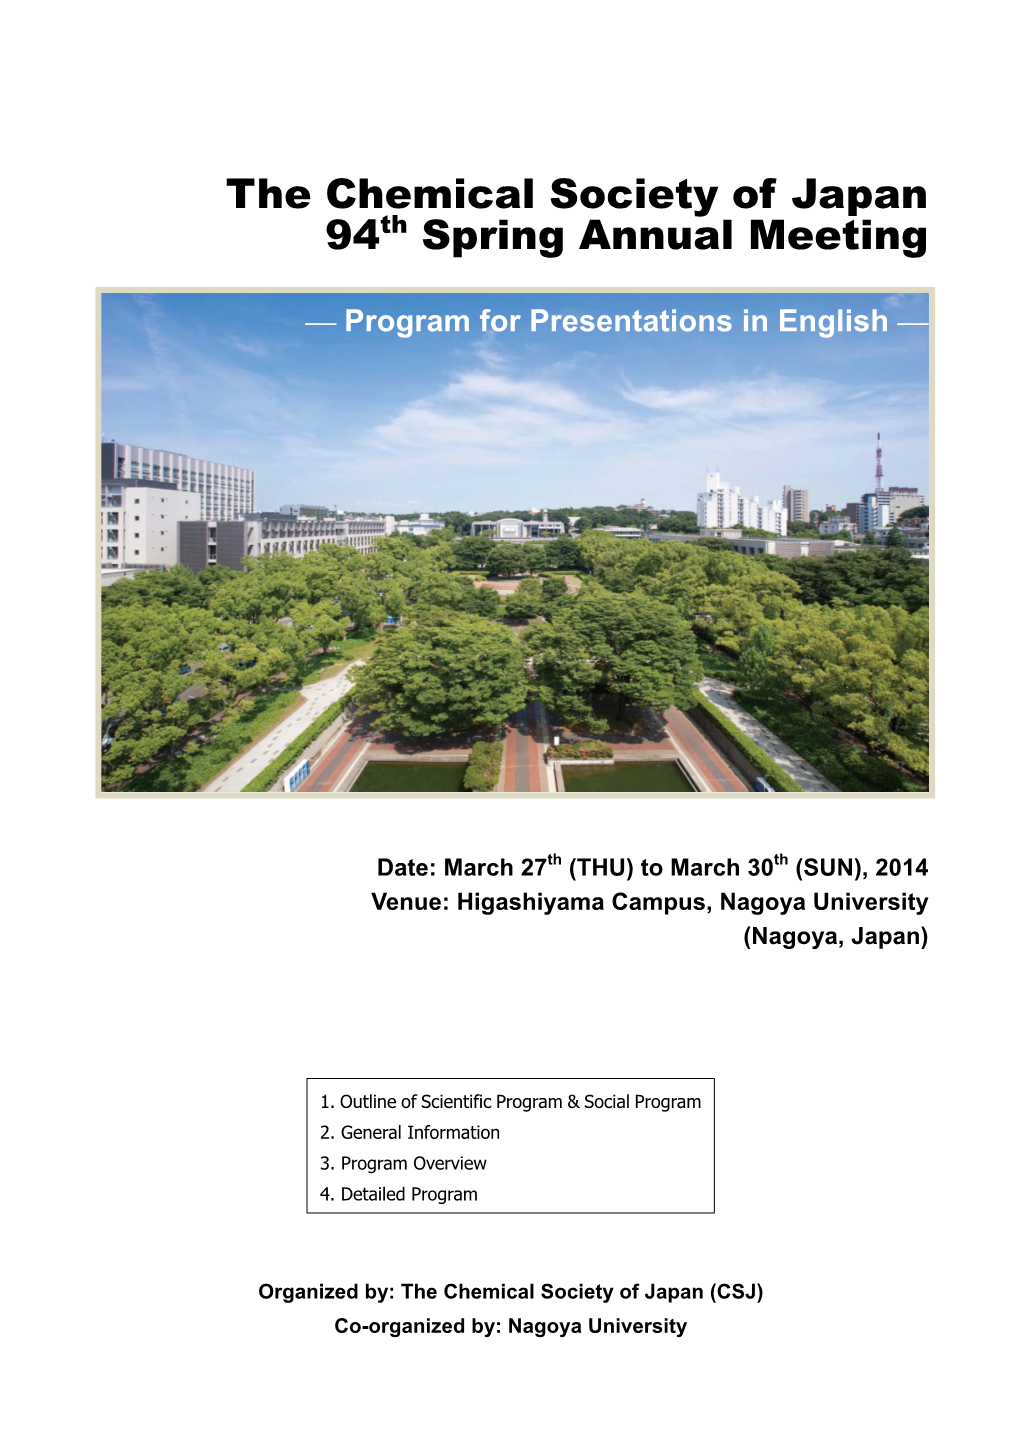 The Chemical Society of Japan 94Th Spring Annual Meeting